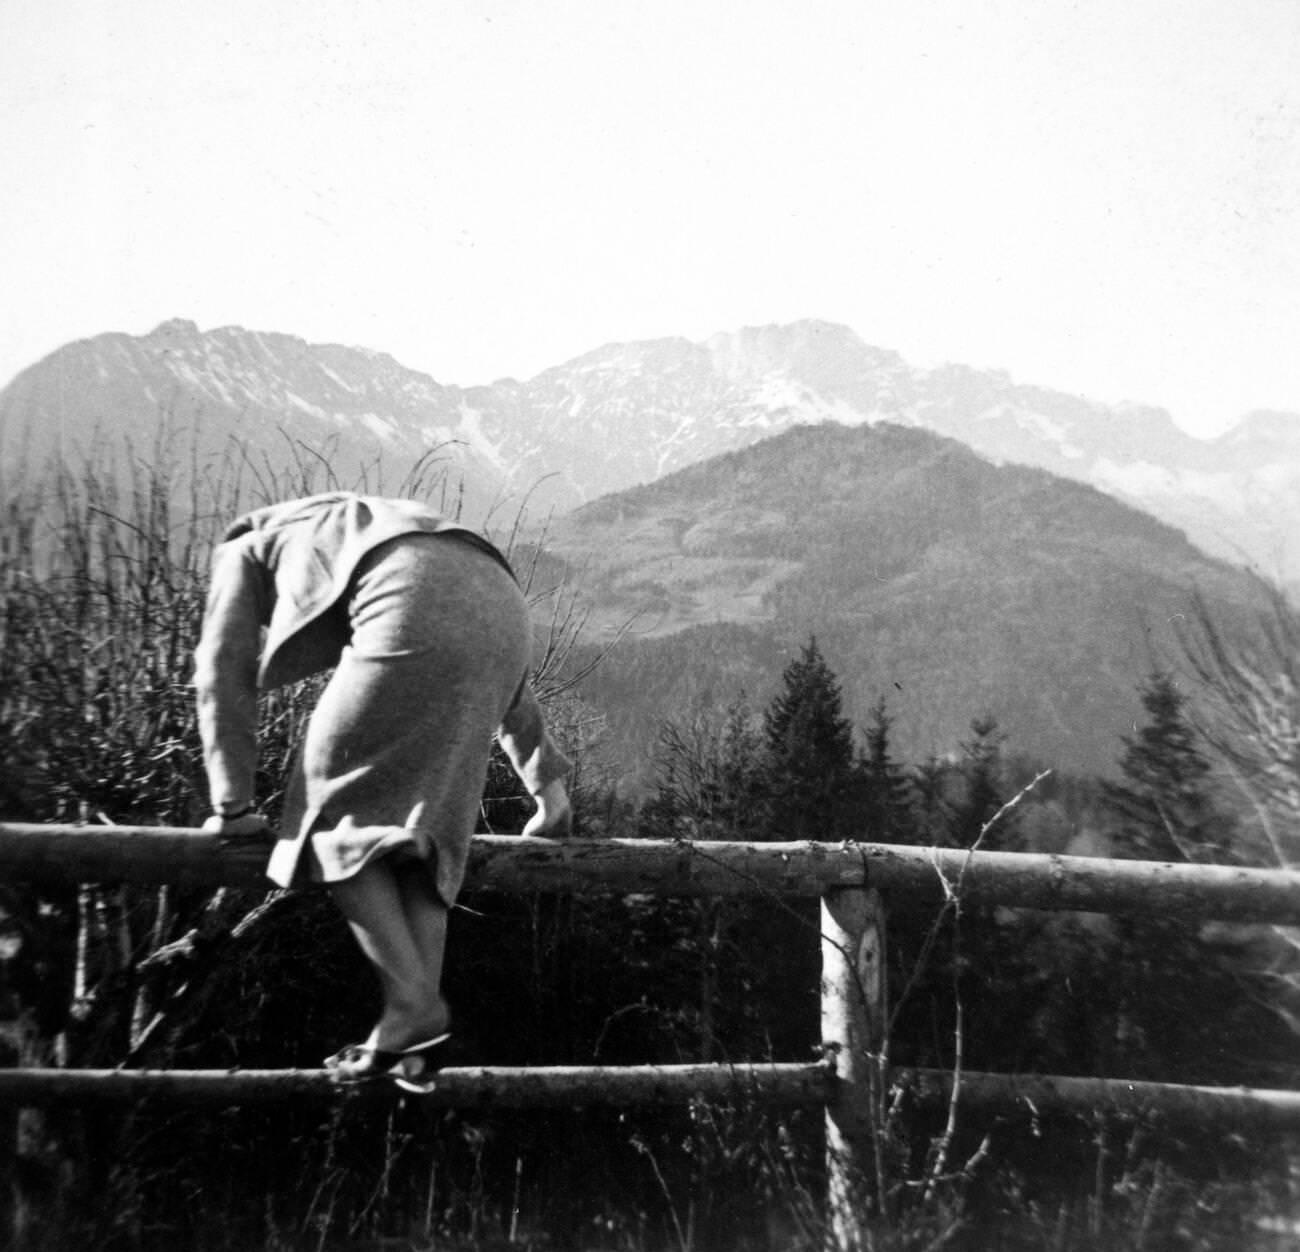 Eva Braun climbing a fence in 1930s or 1940s Germany